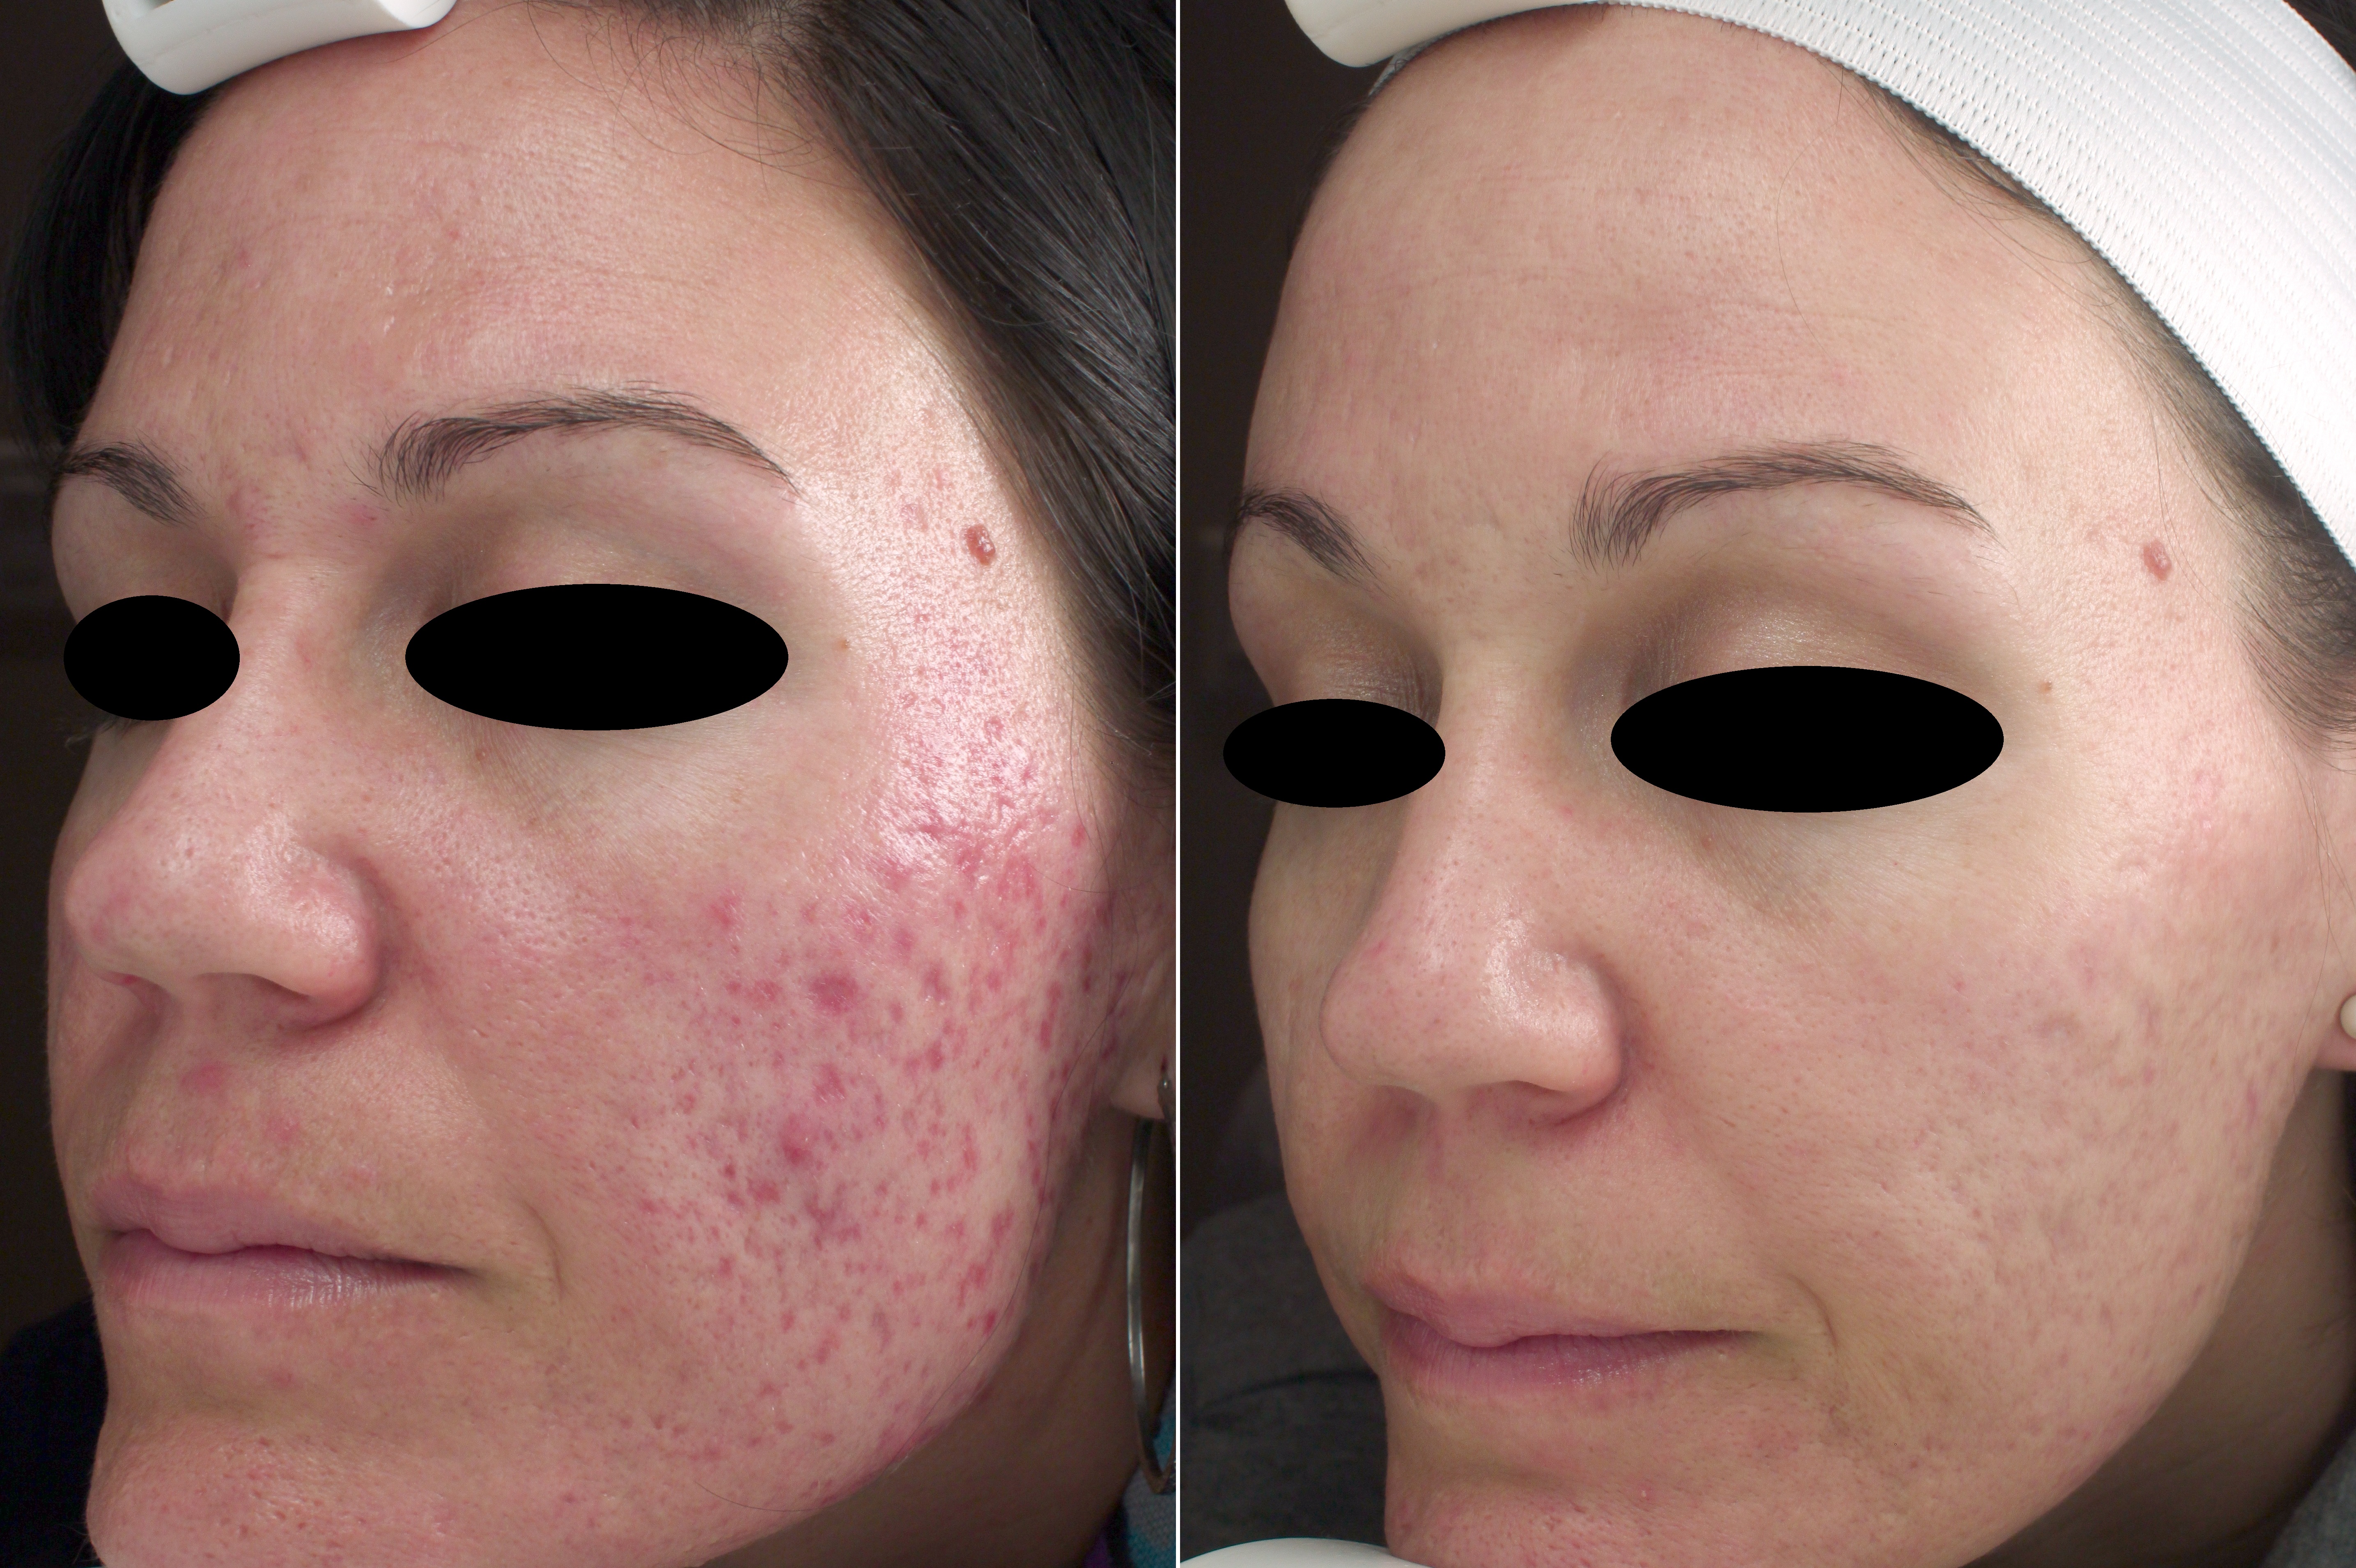 Laser Treatment for Acne and Acne Scars at DermaSpa Ajax Pickering